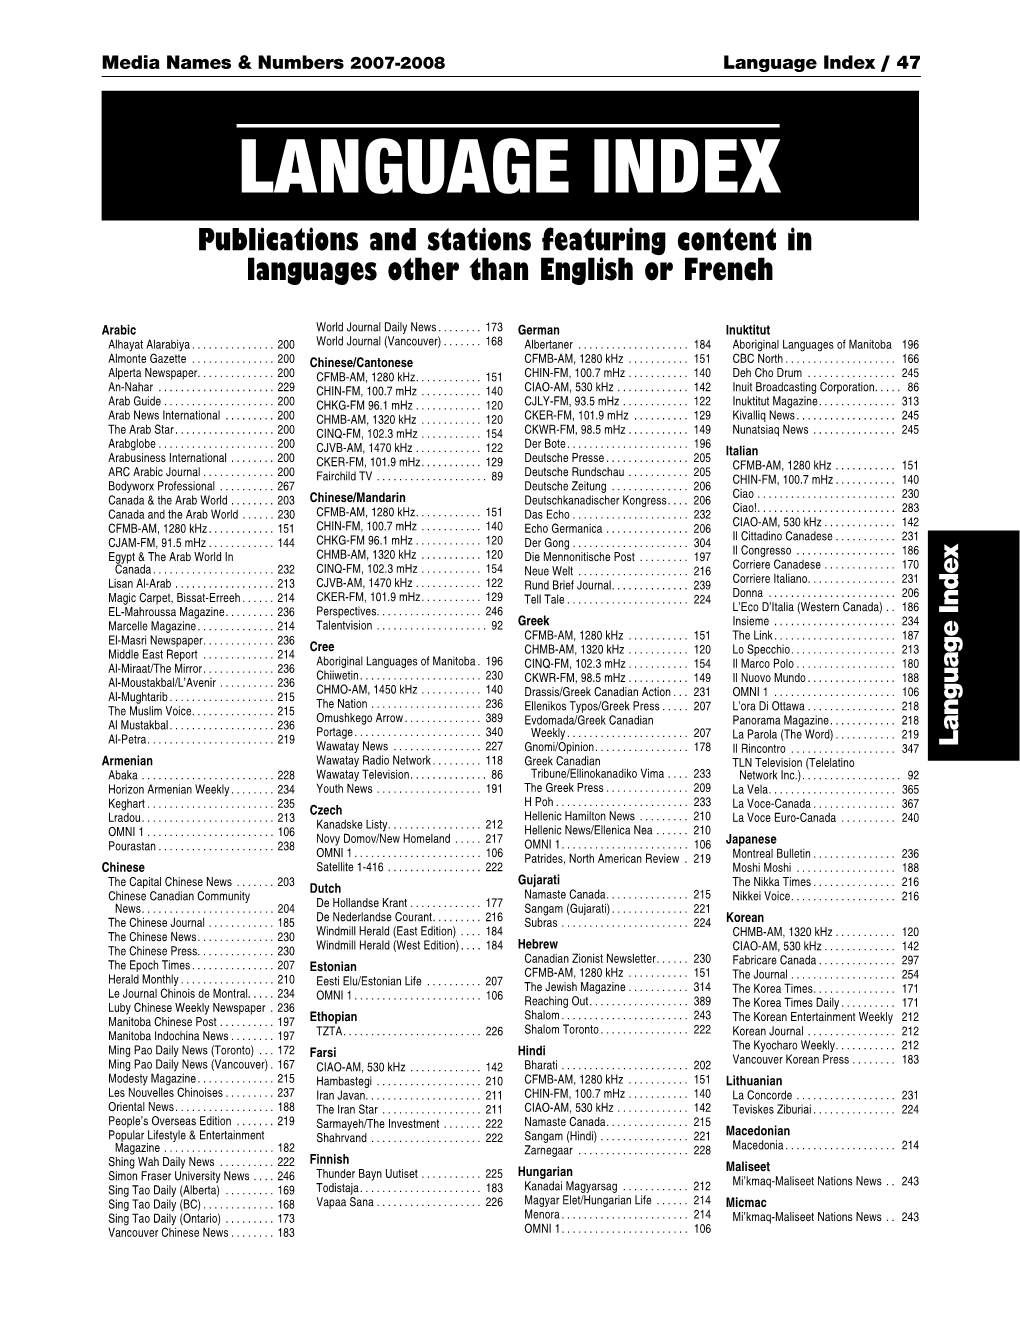 Language Index / 47 LANGUAGE INDEX Publications and Stations Featuring Content in Languages Other Than English Or French